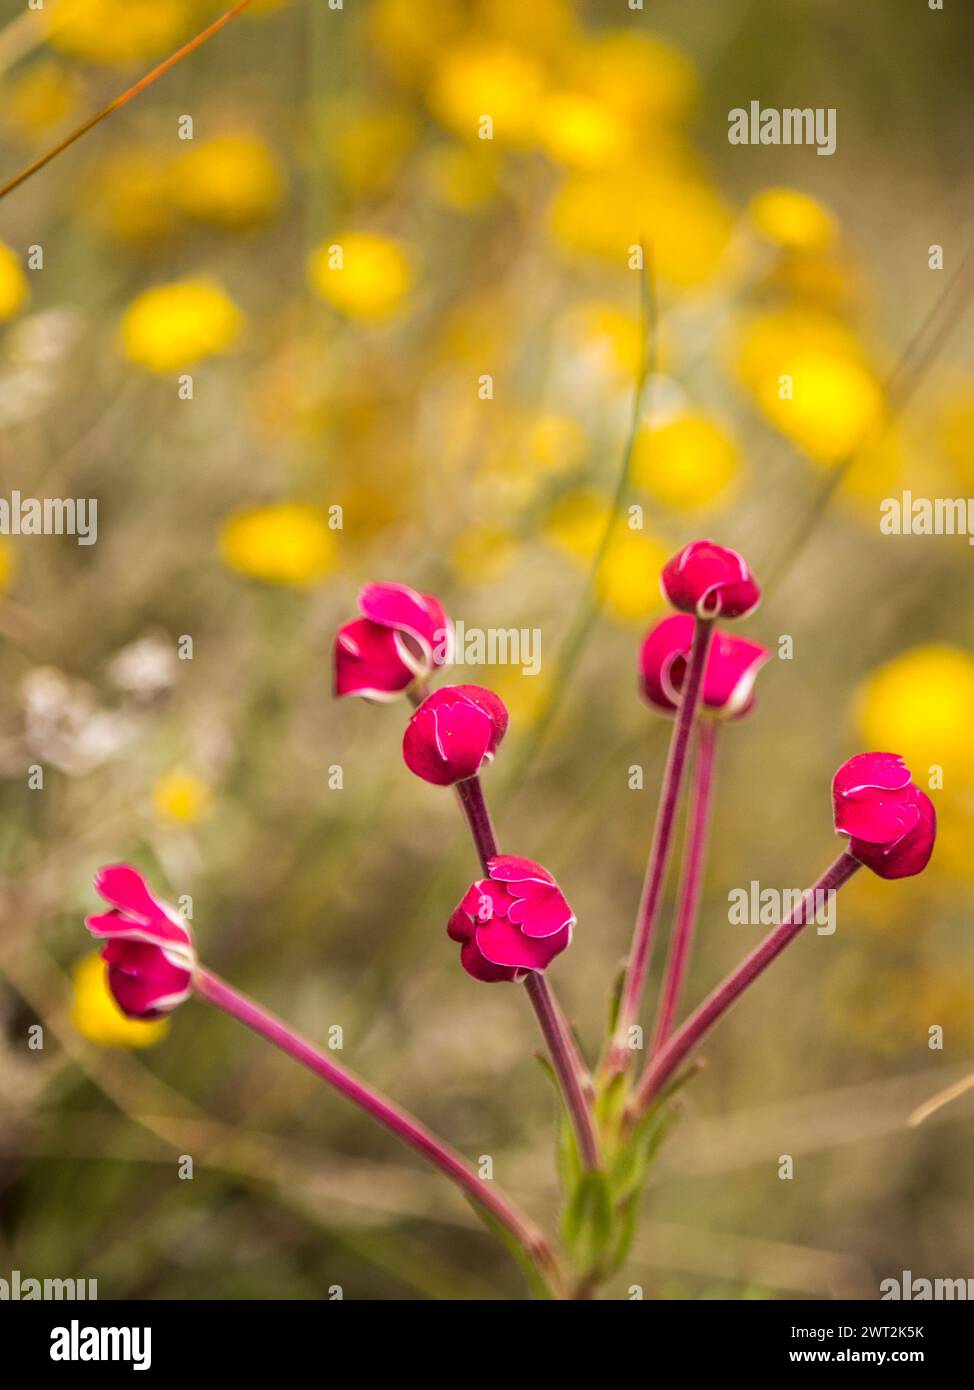 The closed pink flower buds of the strangely shaped Zaluzianskya microsiphon, against a yellow background of wildflowers Stock Photo